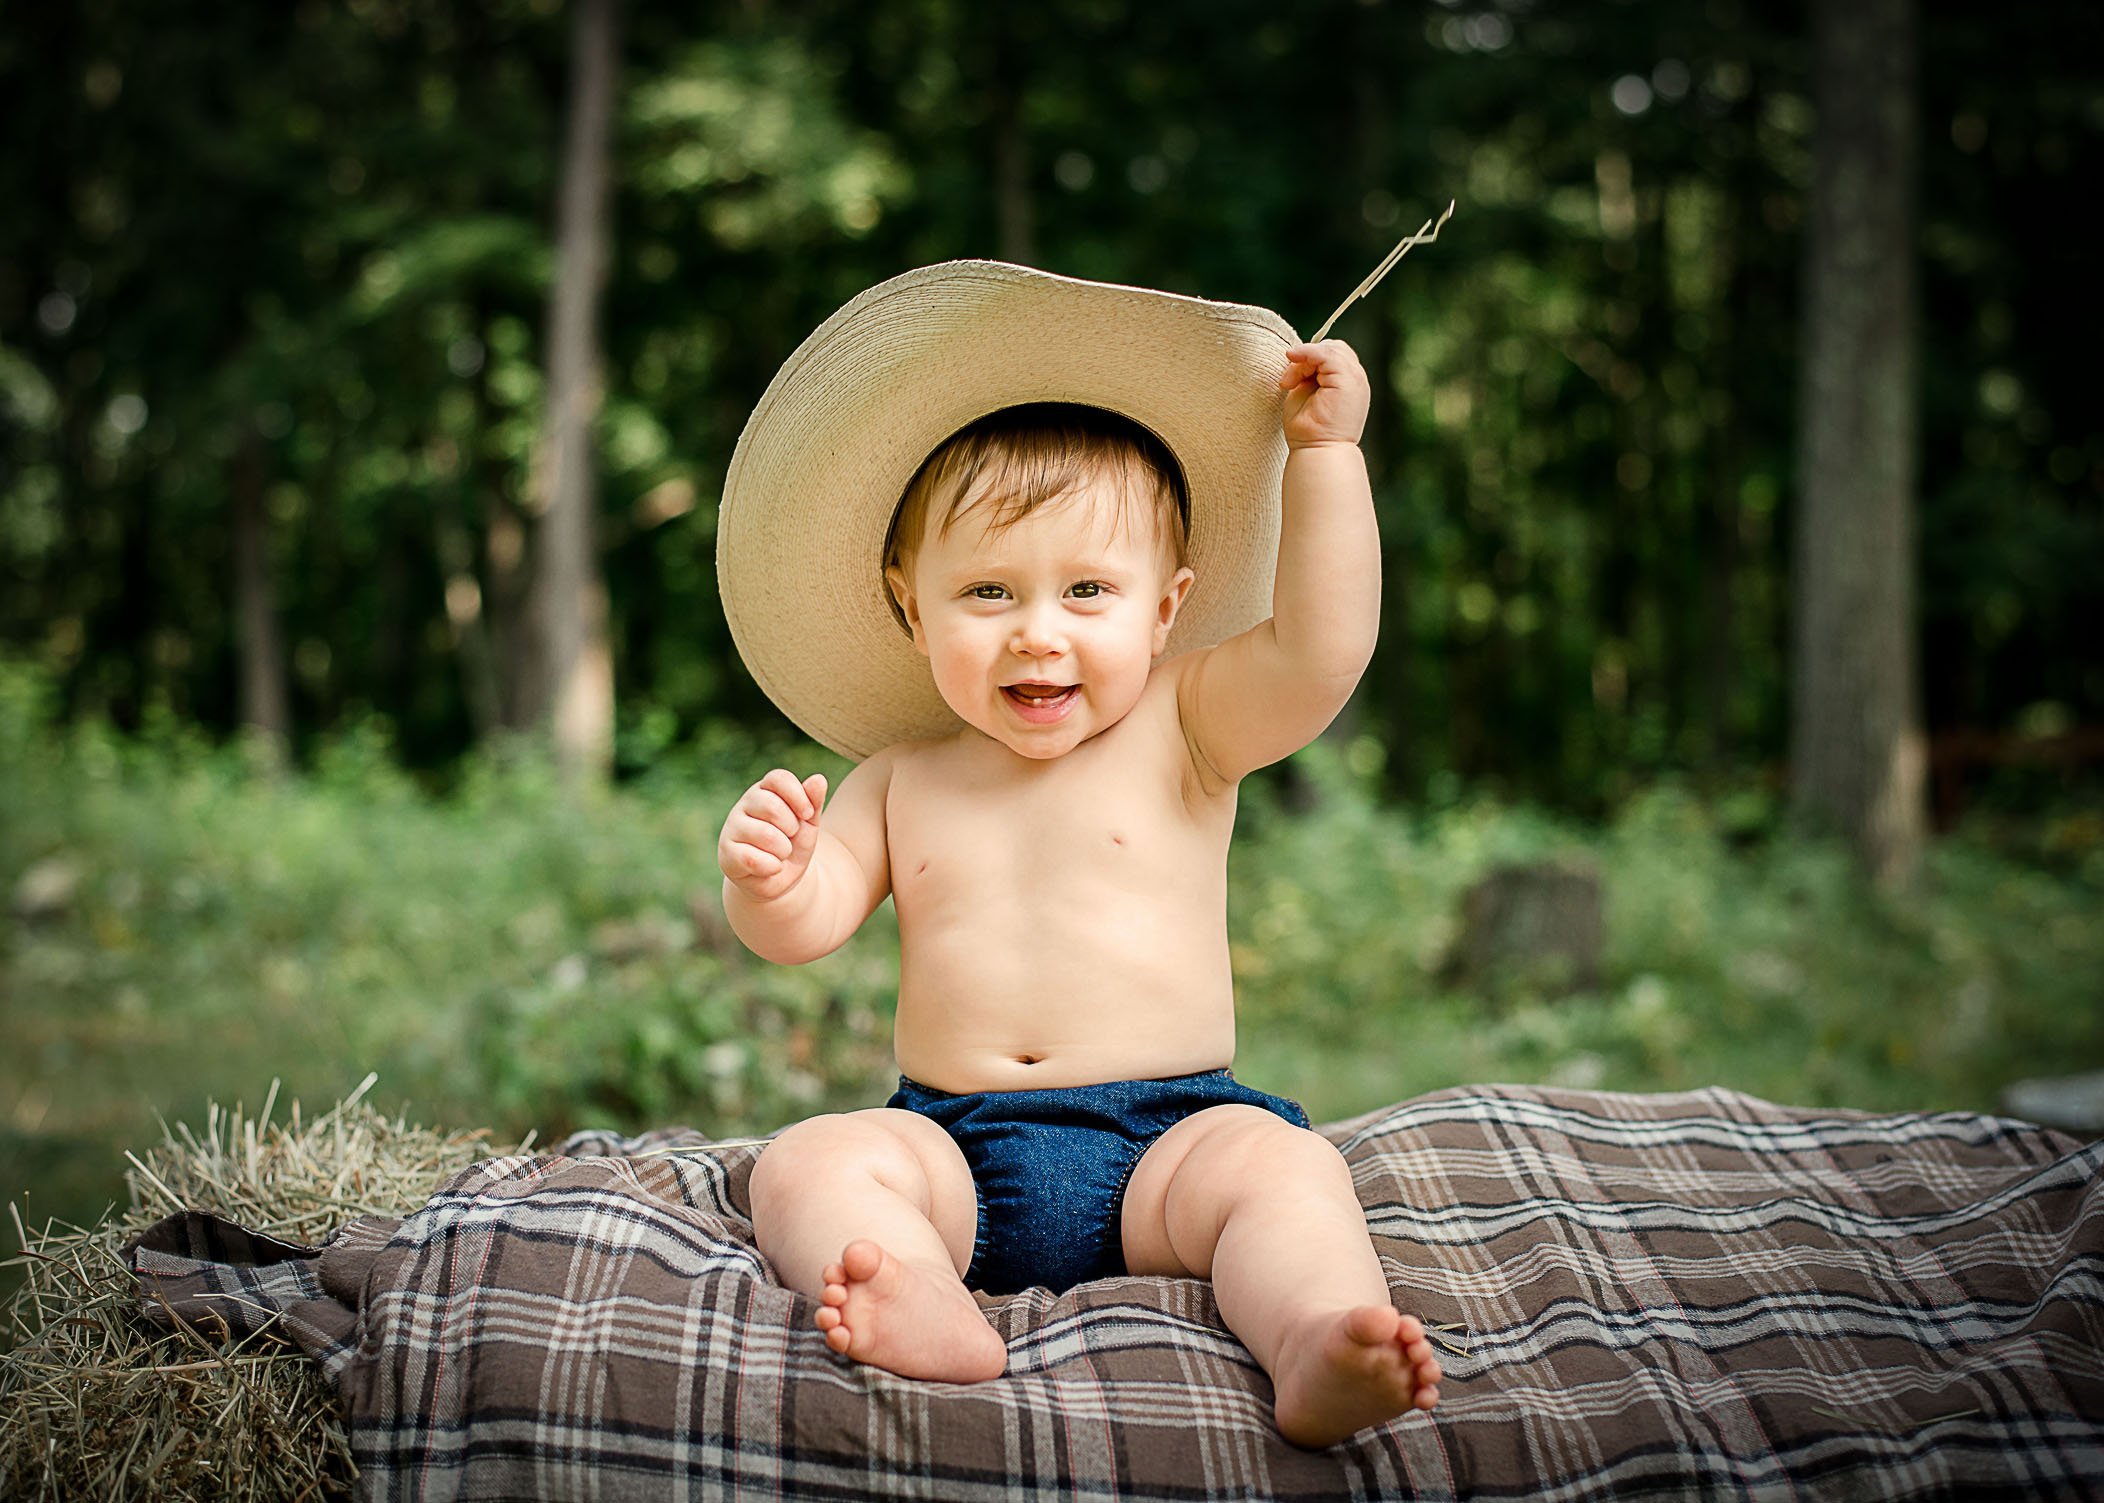 9 mo old baby boy with cowboy hat on sitting outside One Big Happy Photo